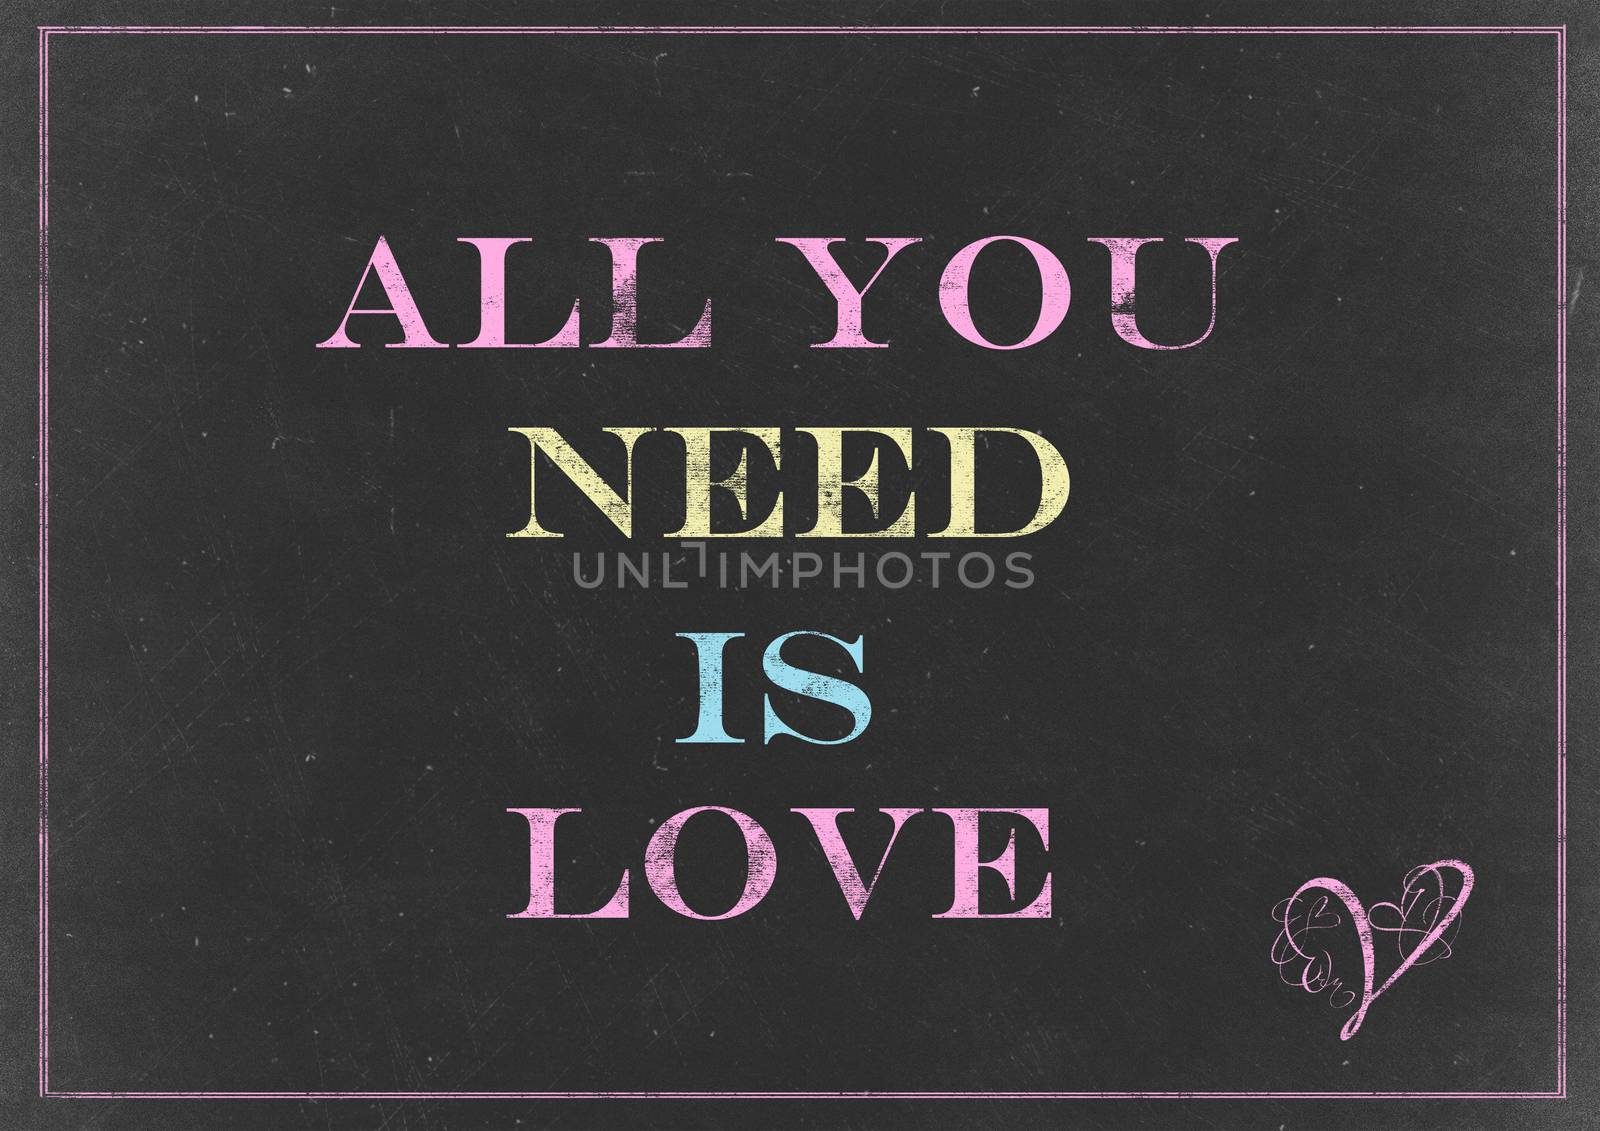 Chalk drawing - concept of "All you need is love"